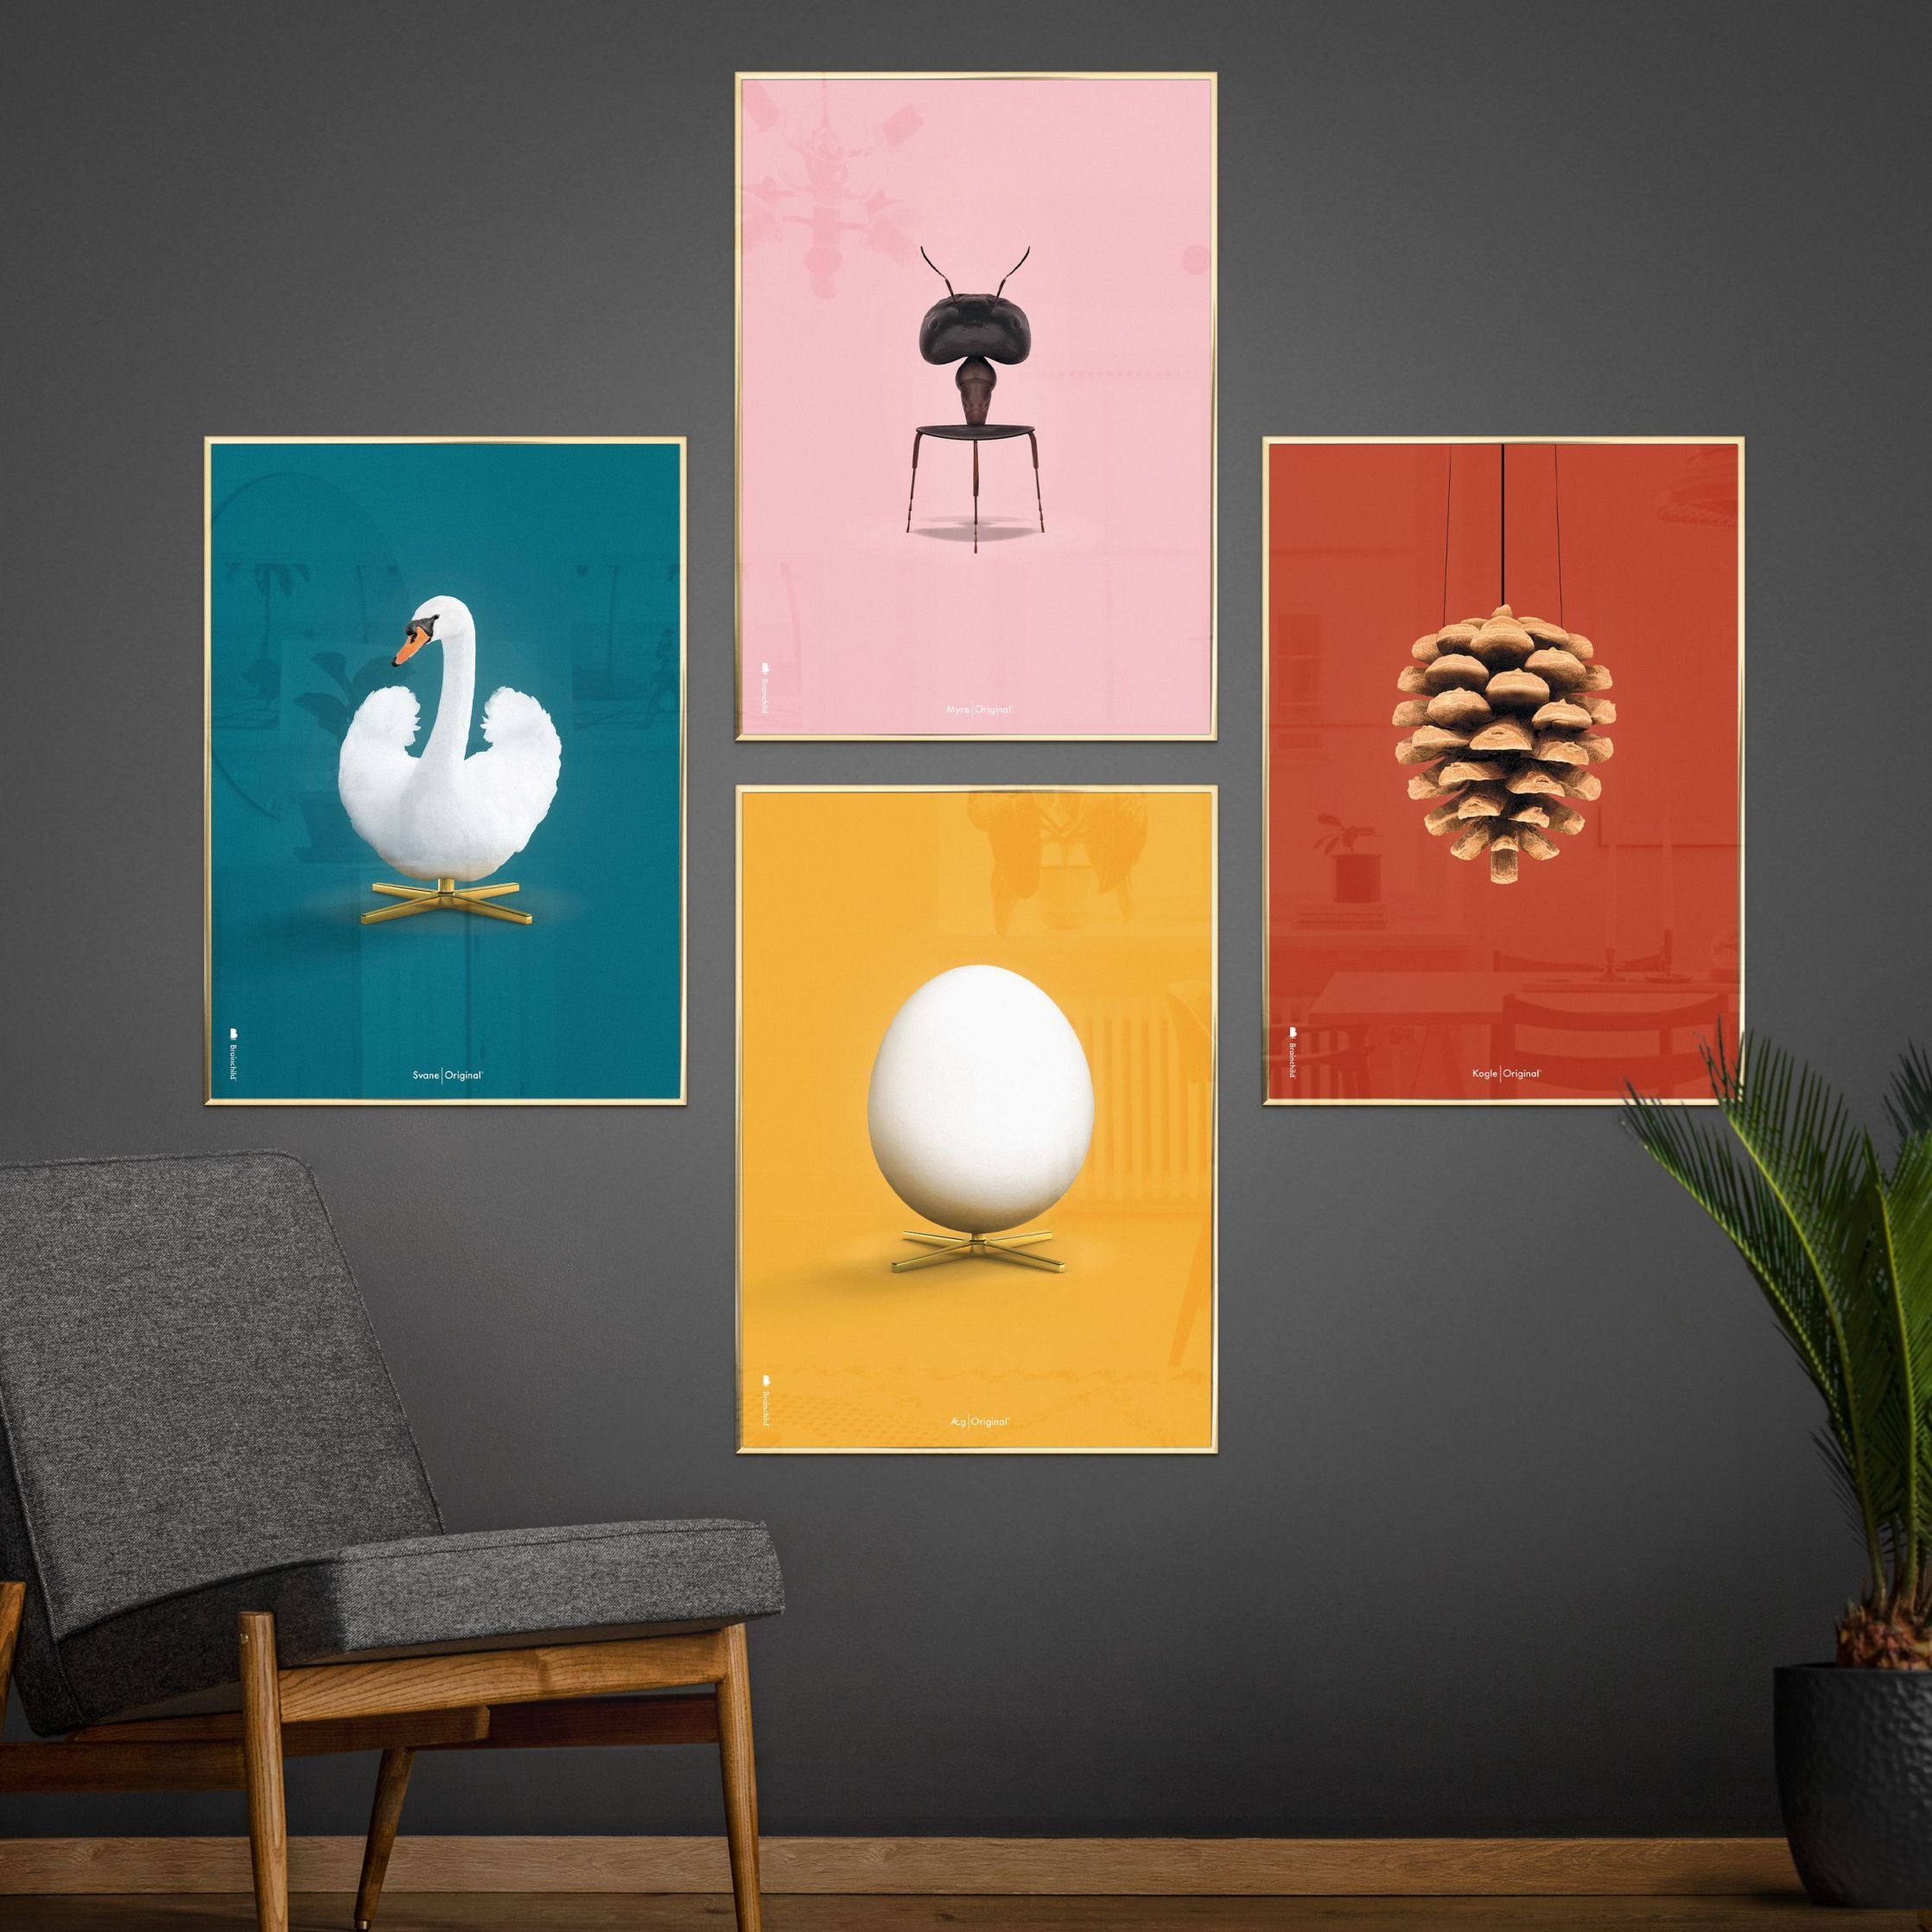 Brainchild Egg Classic Poster, Frame In Black Lacquered Wood 50x70 Cm, Yellow Background